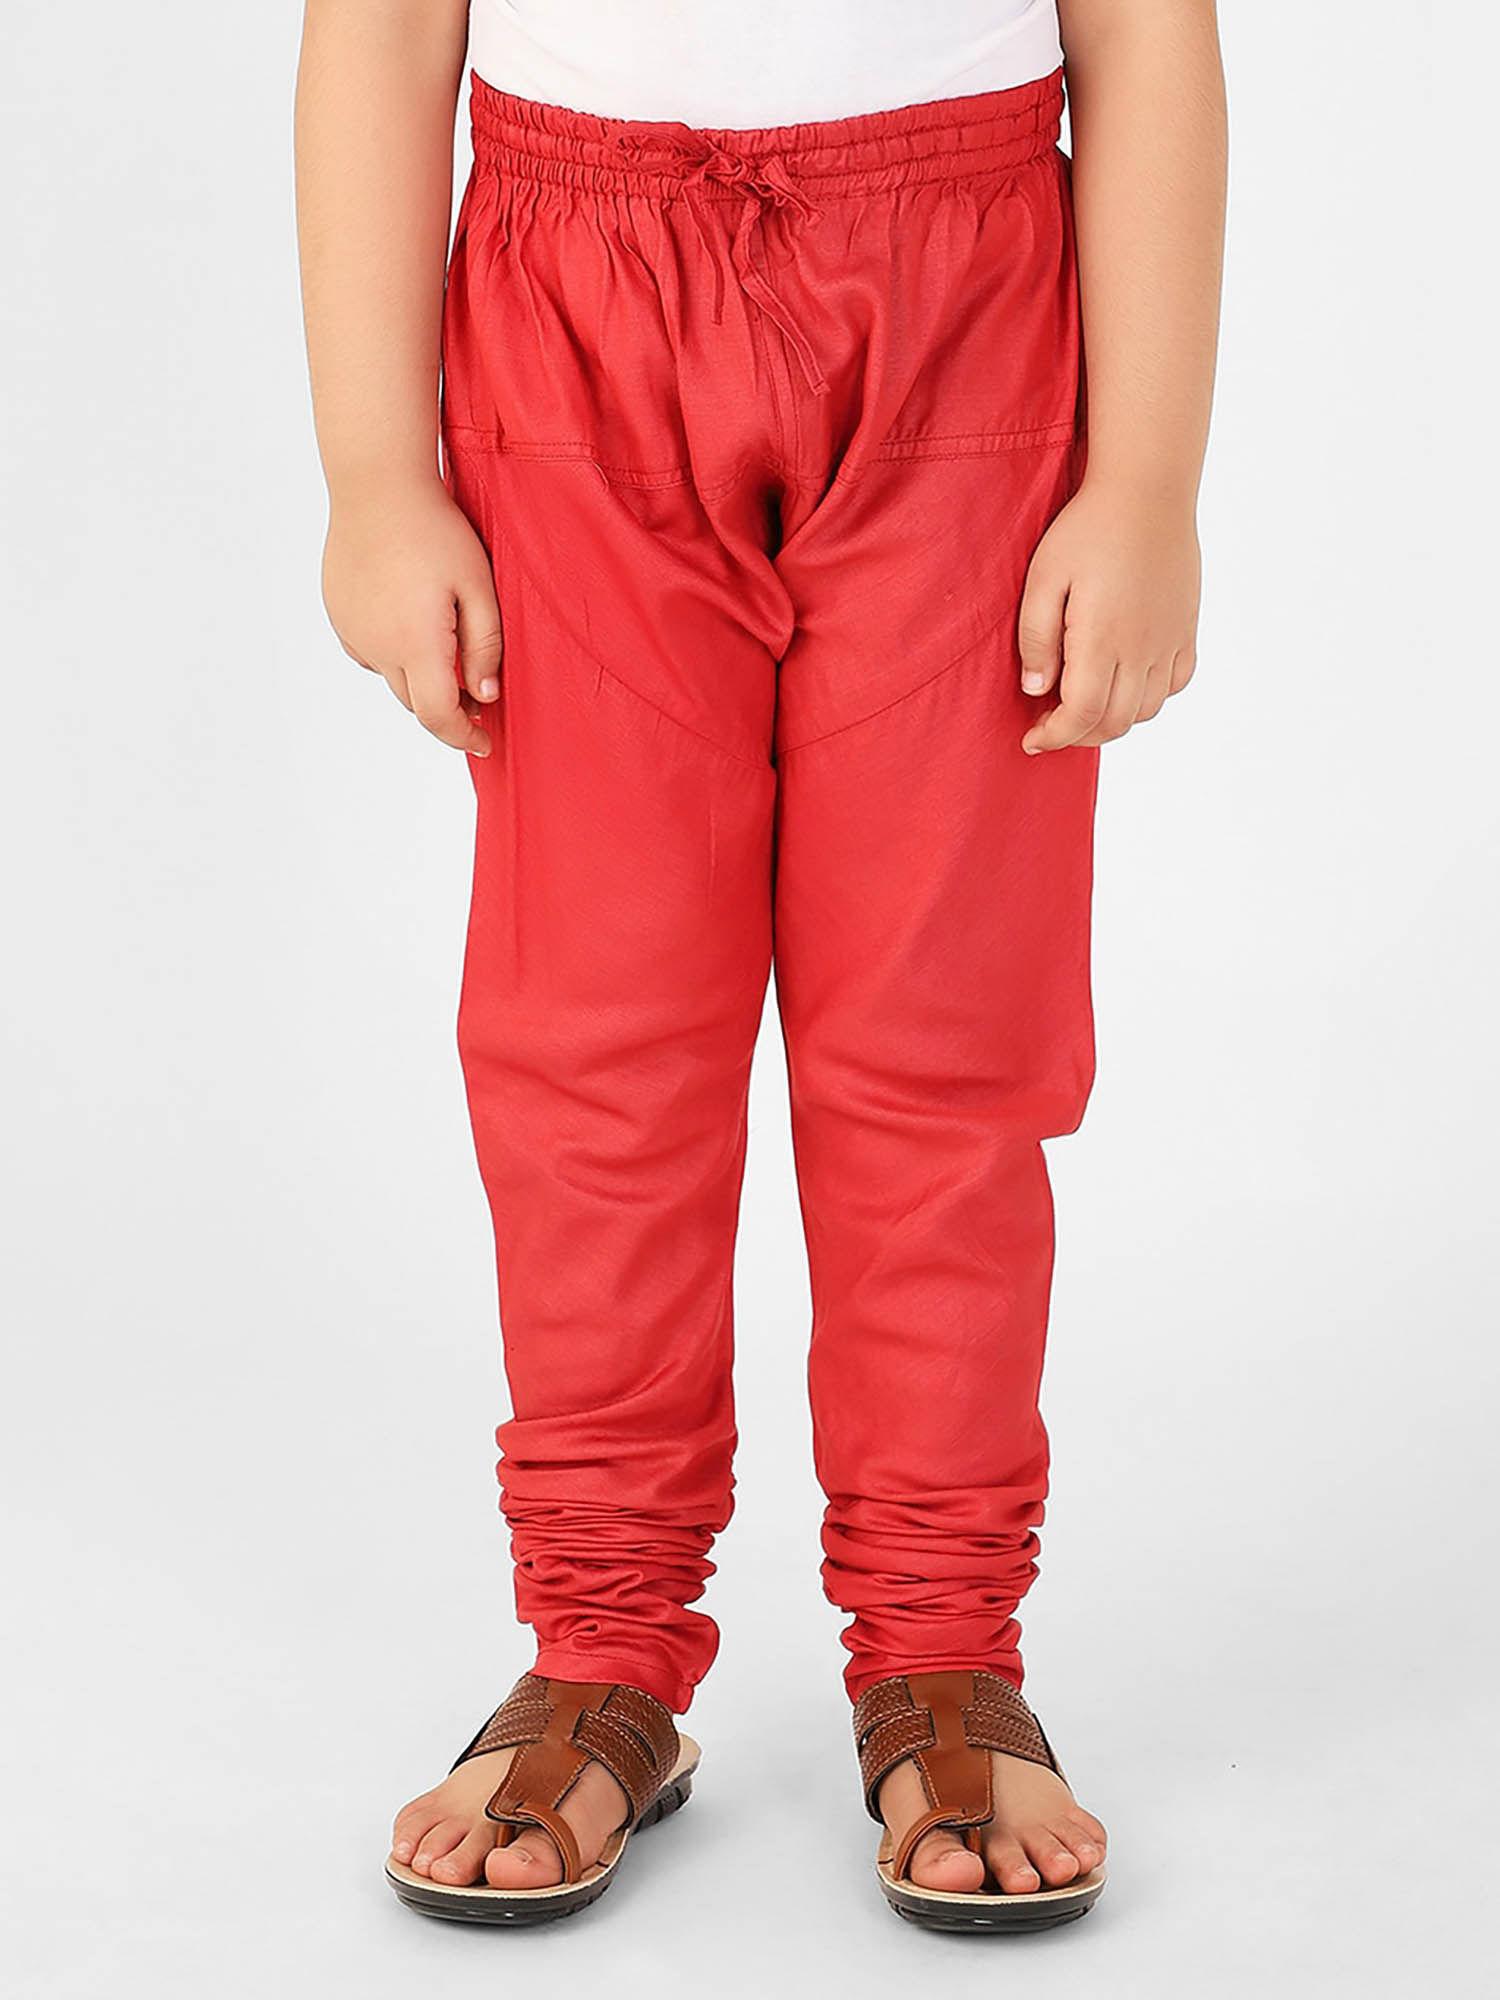 boys red pant